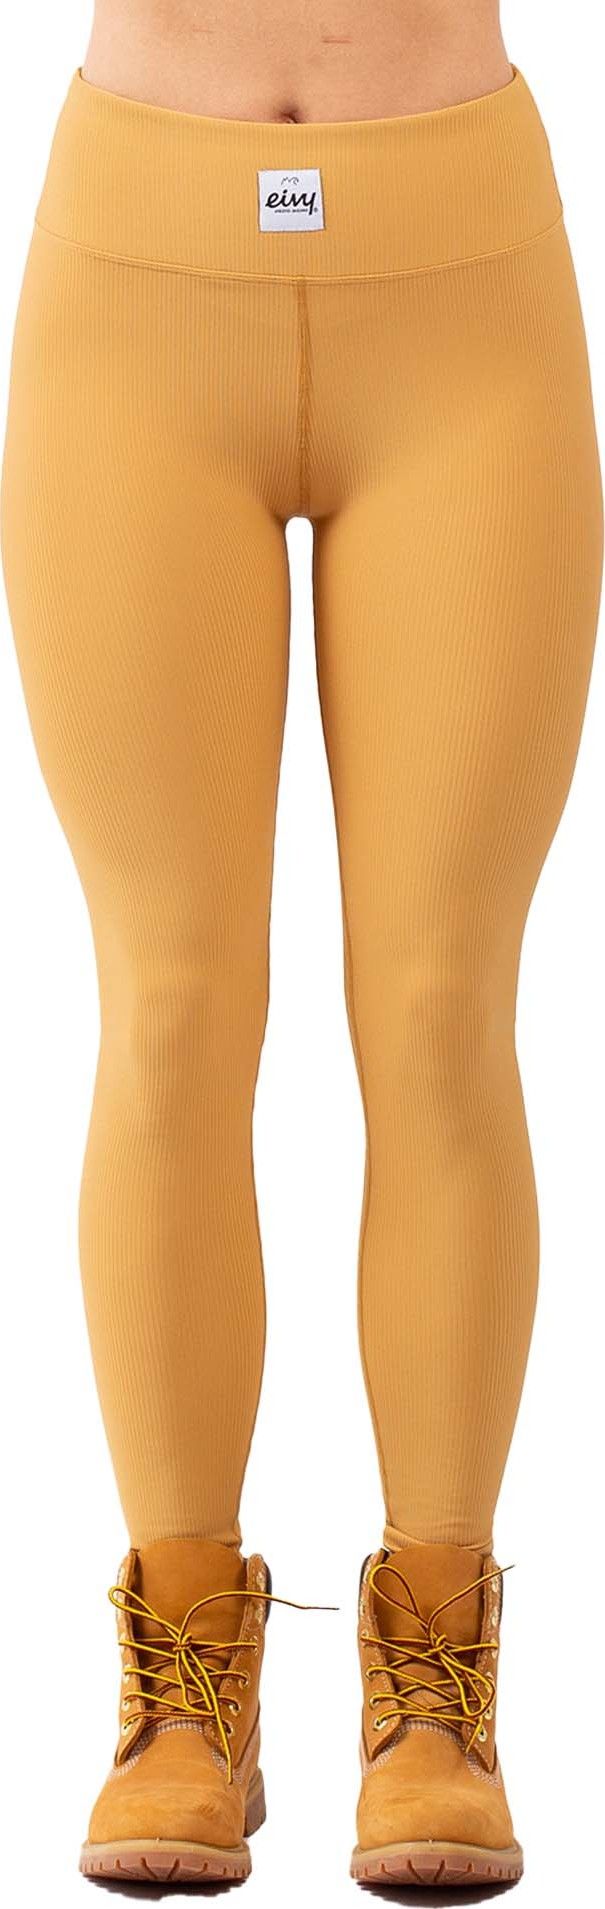 Eivy Women's Icecold Rib Tights Faded Amber